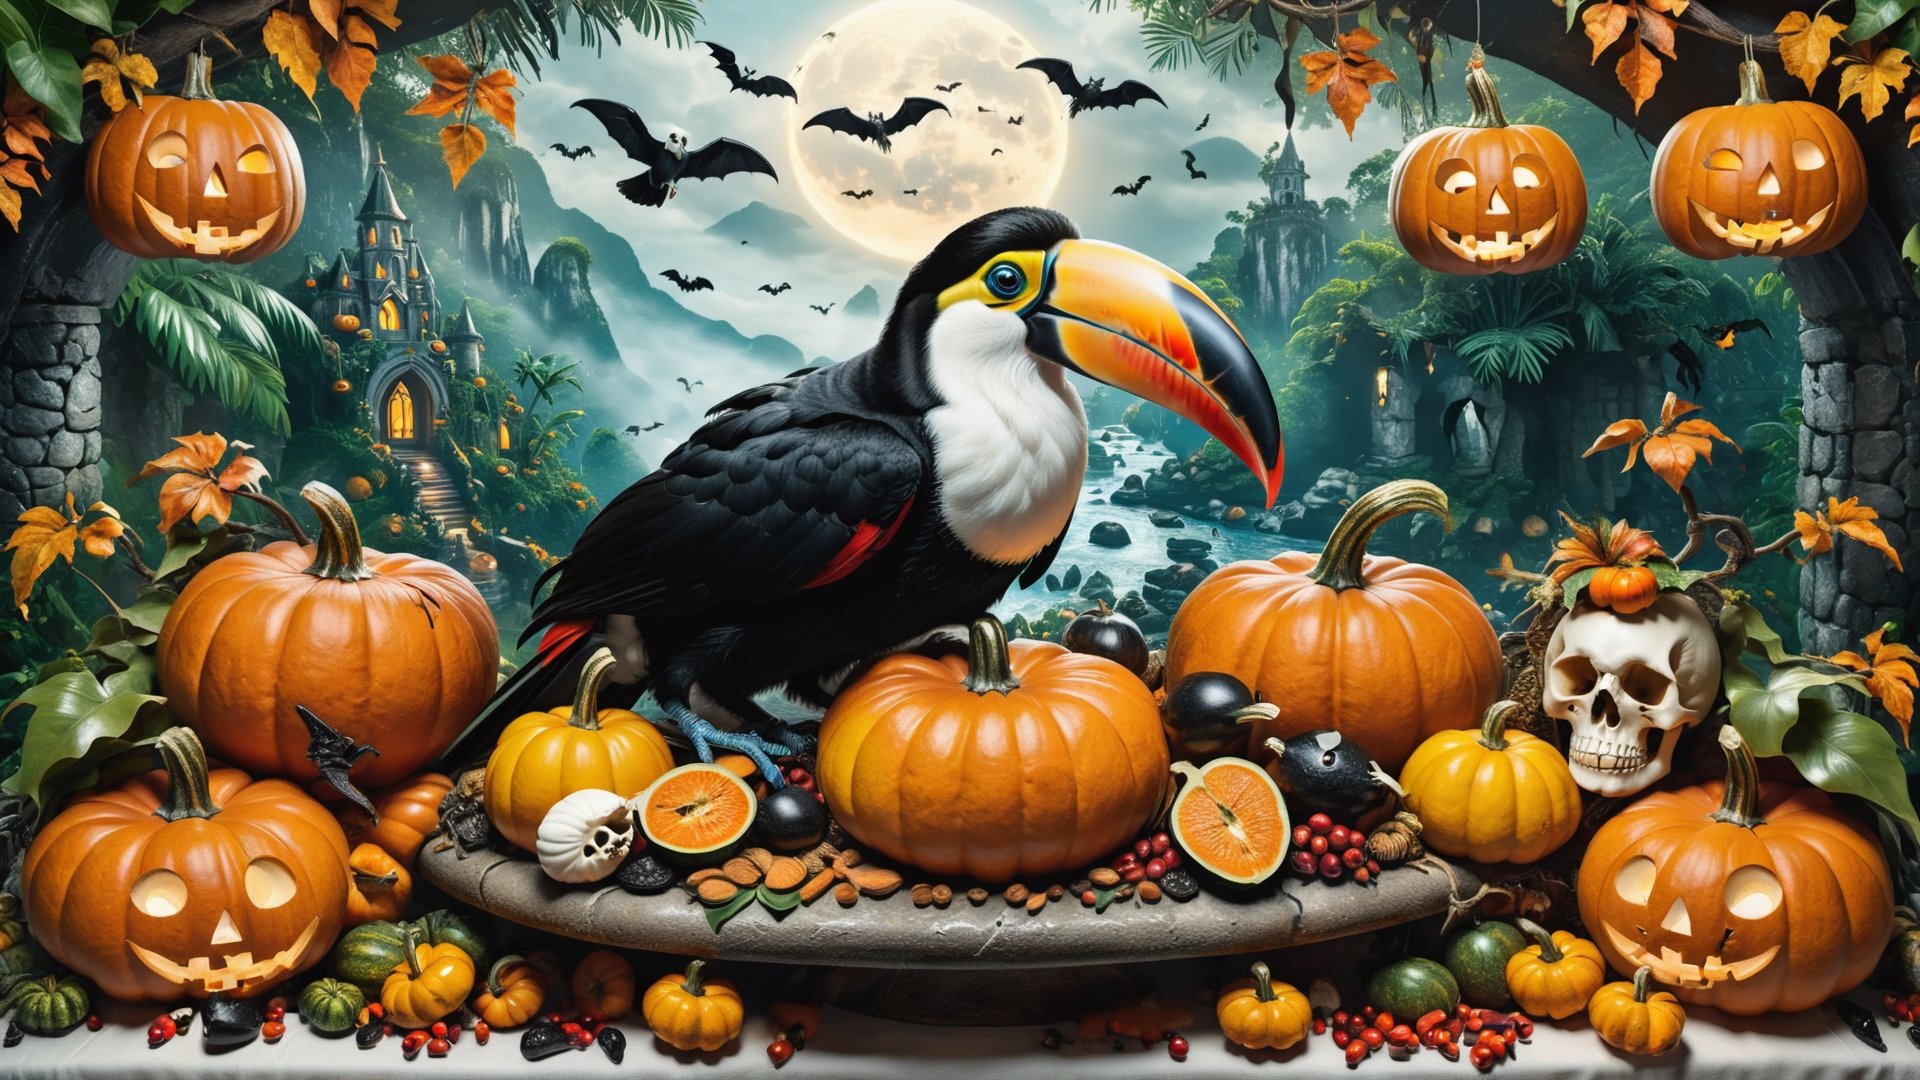 Photorealistic representation in high definition of  luxurious and mythical horror scene, themed on Halloween, of a beautiful toucan chef, surrounded by pumpkins, with spooky paths, and details in skulls and bats, in a jungle with stones, and tasty dishes of food